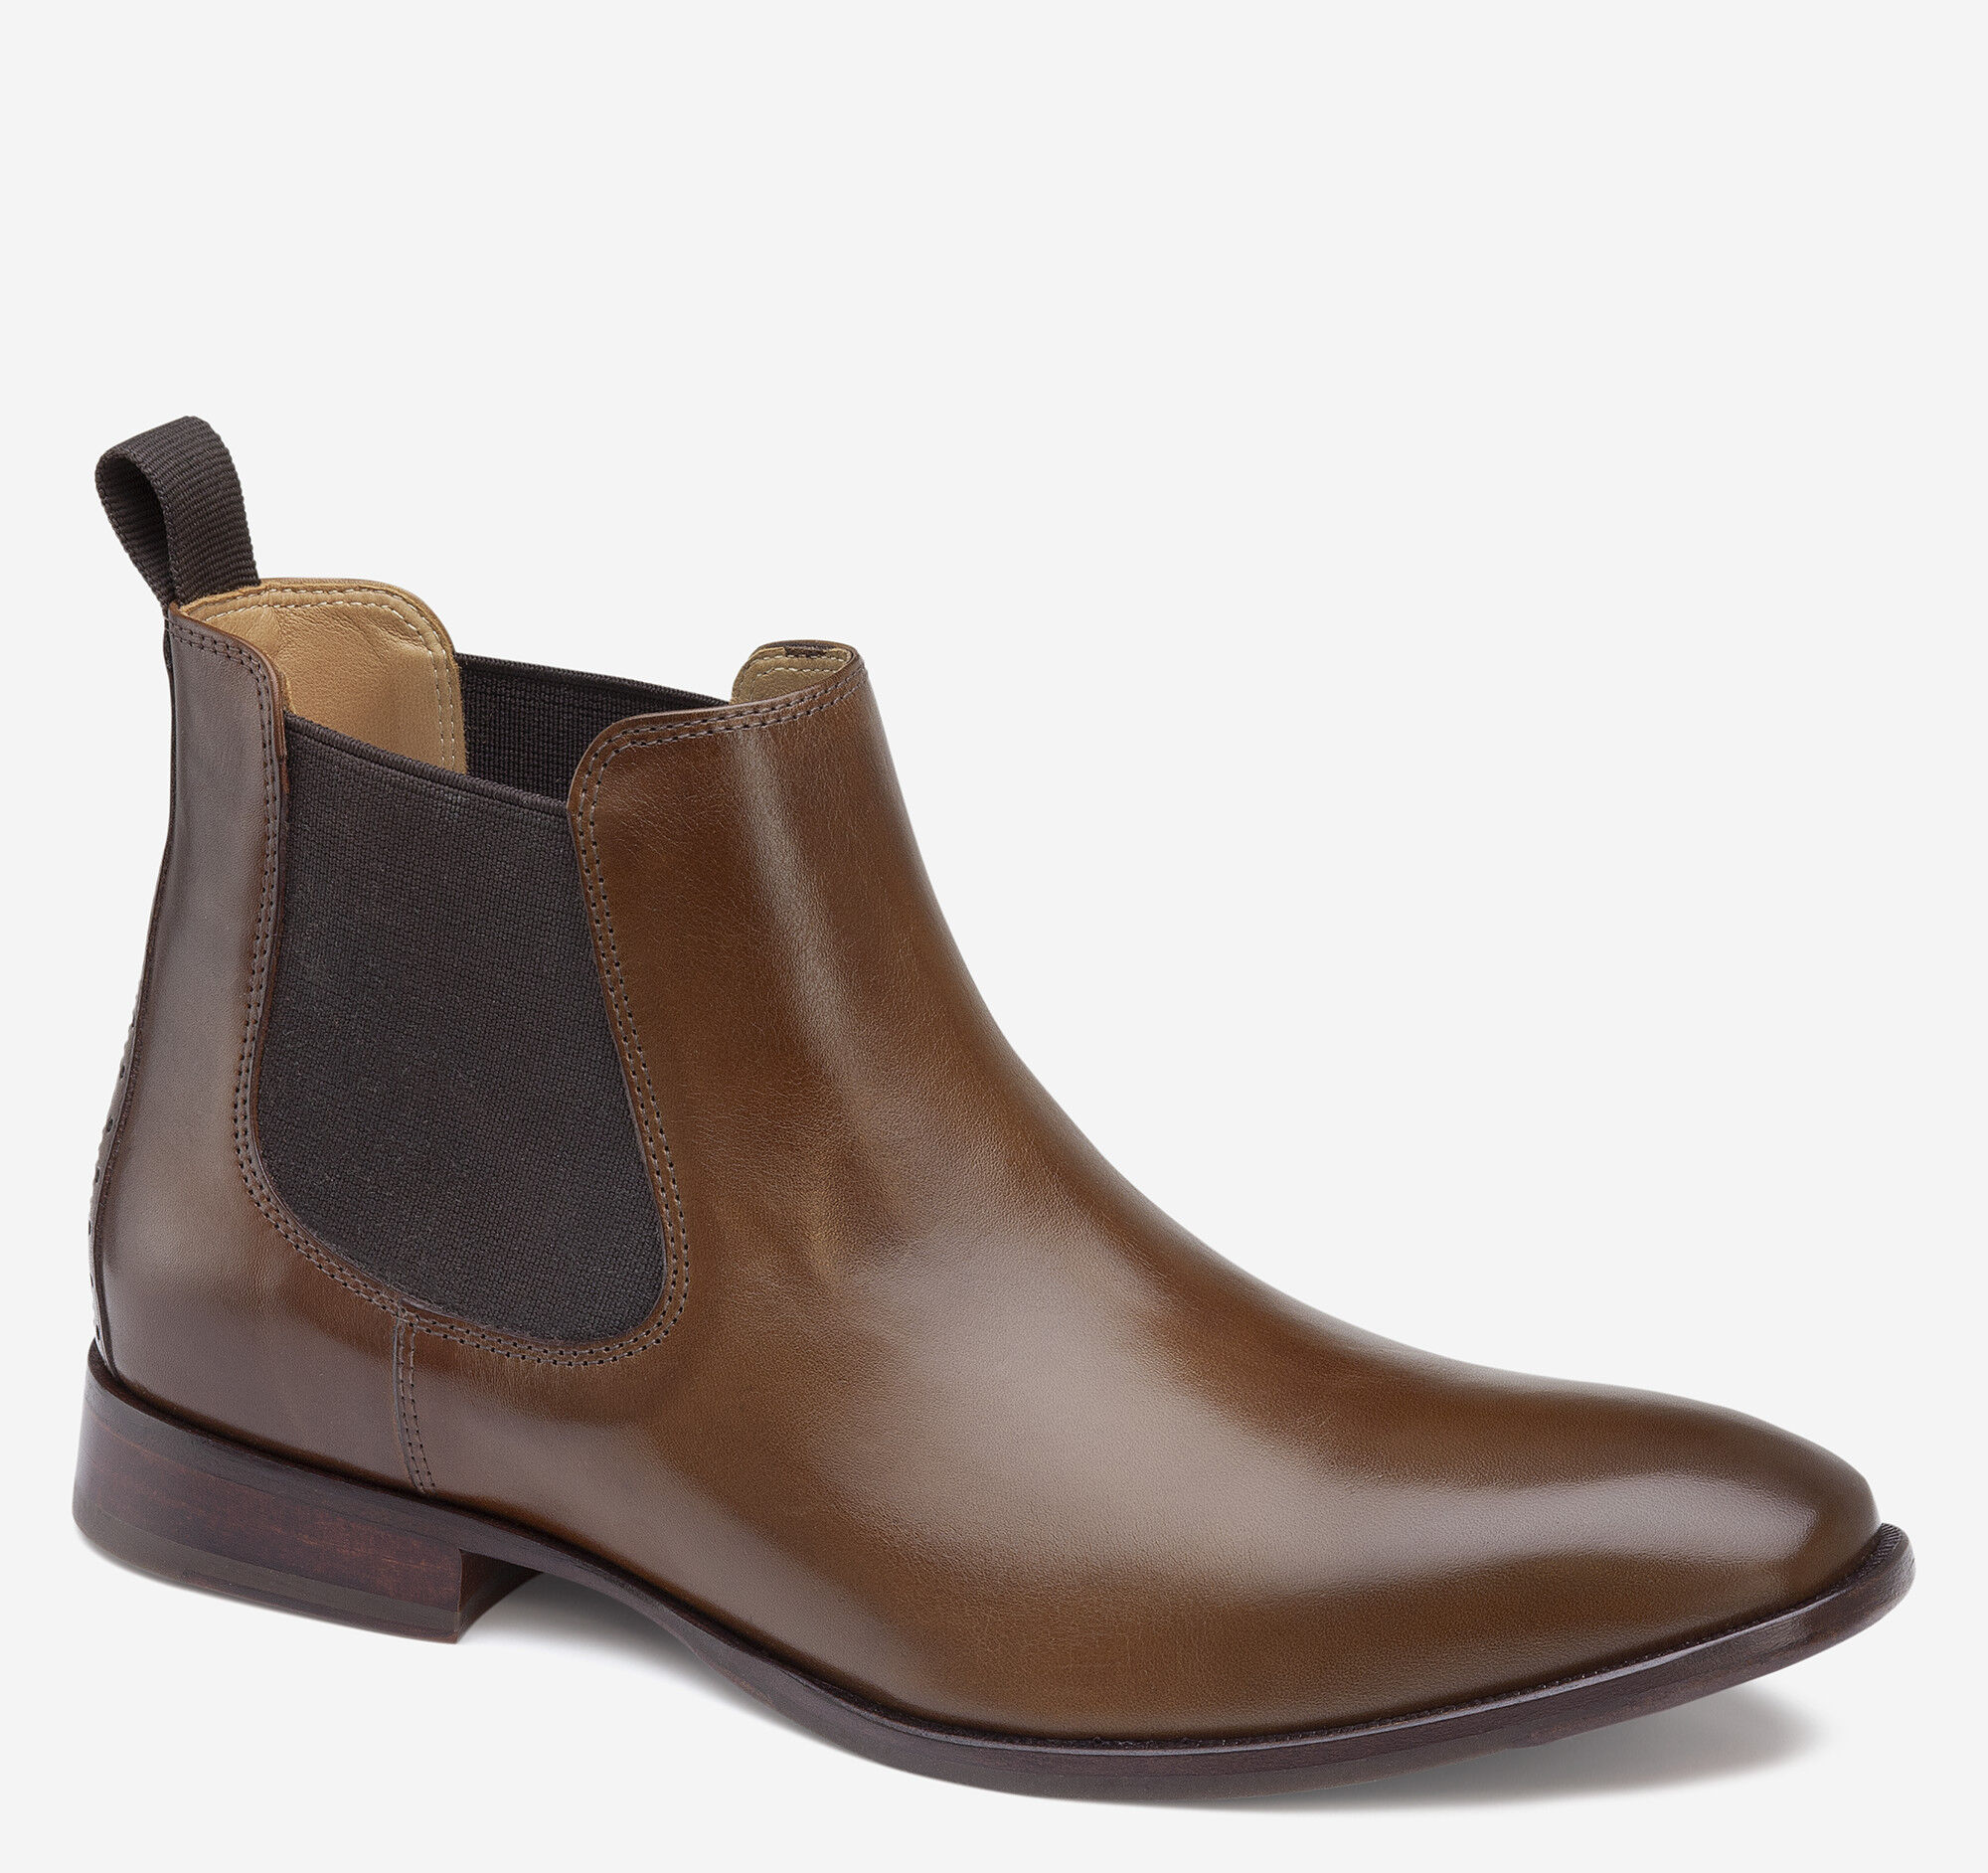 johnston and murphy chelsea boots